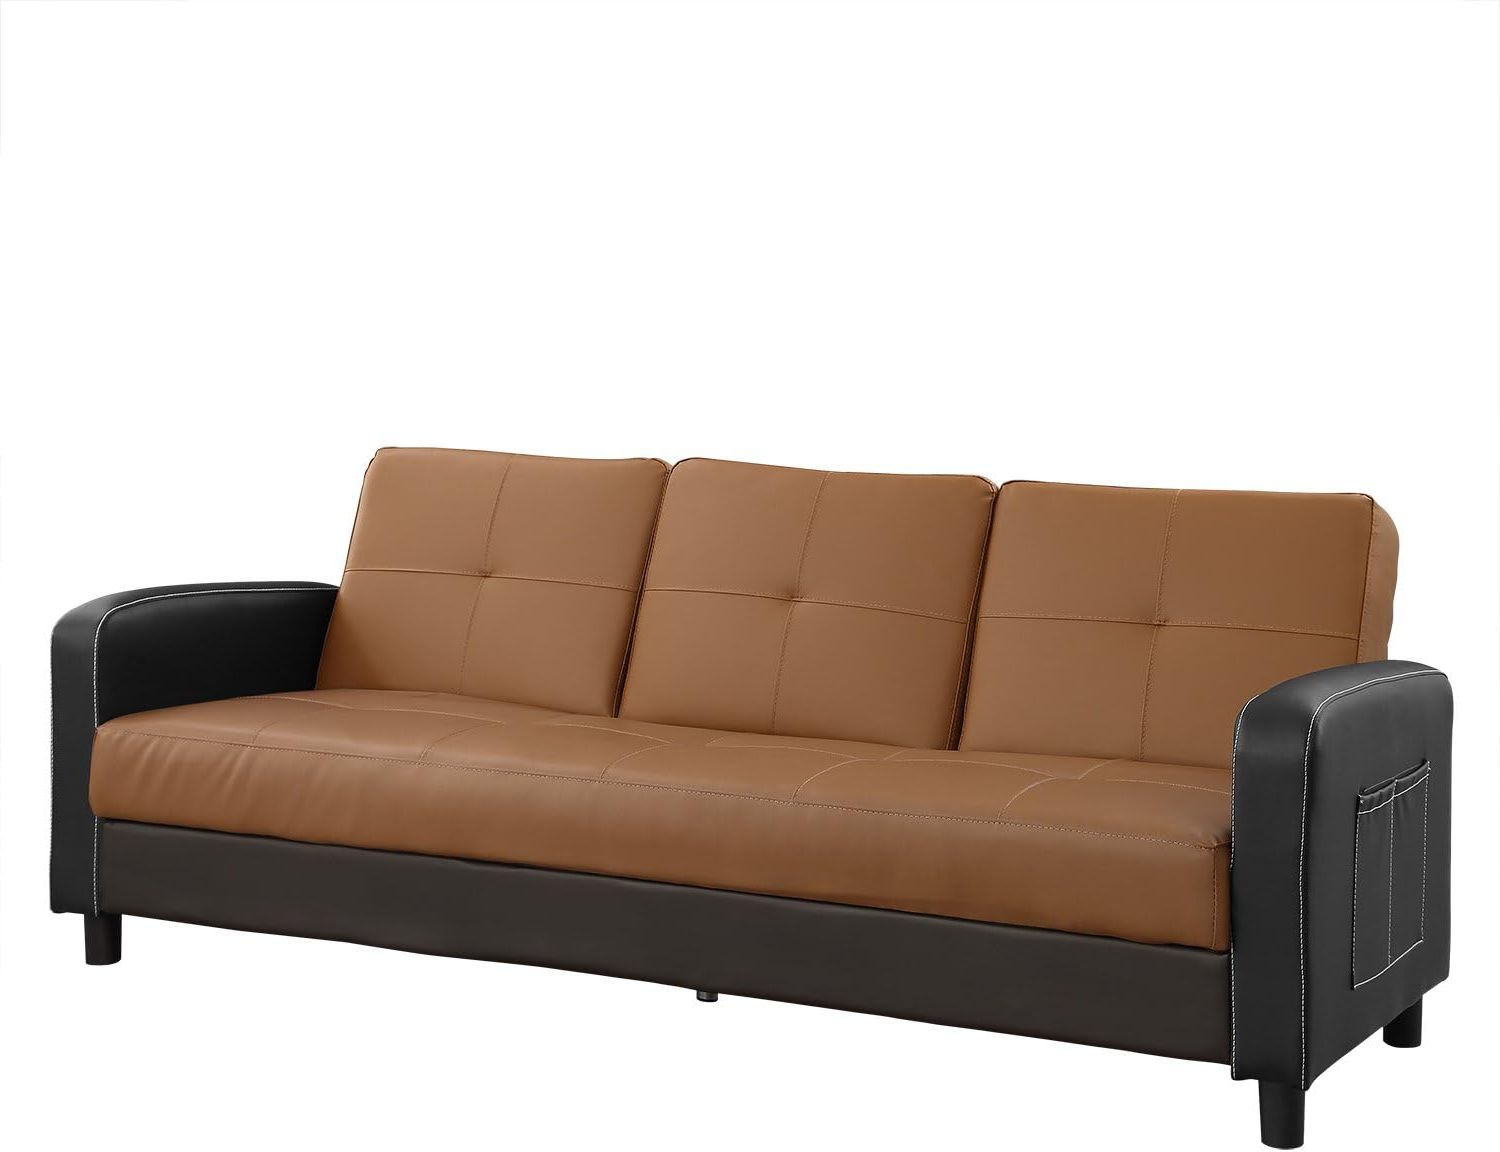 Traditional 3 Seater Faux Leather Sofas In Most Up To Date Furniture Light Brown 3 Seater Faux Leather Sofa Bed With Cup Holder (View 7 of 15)